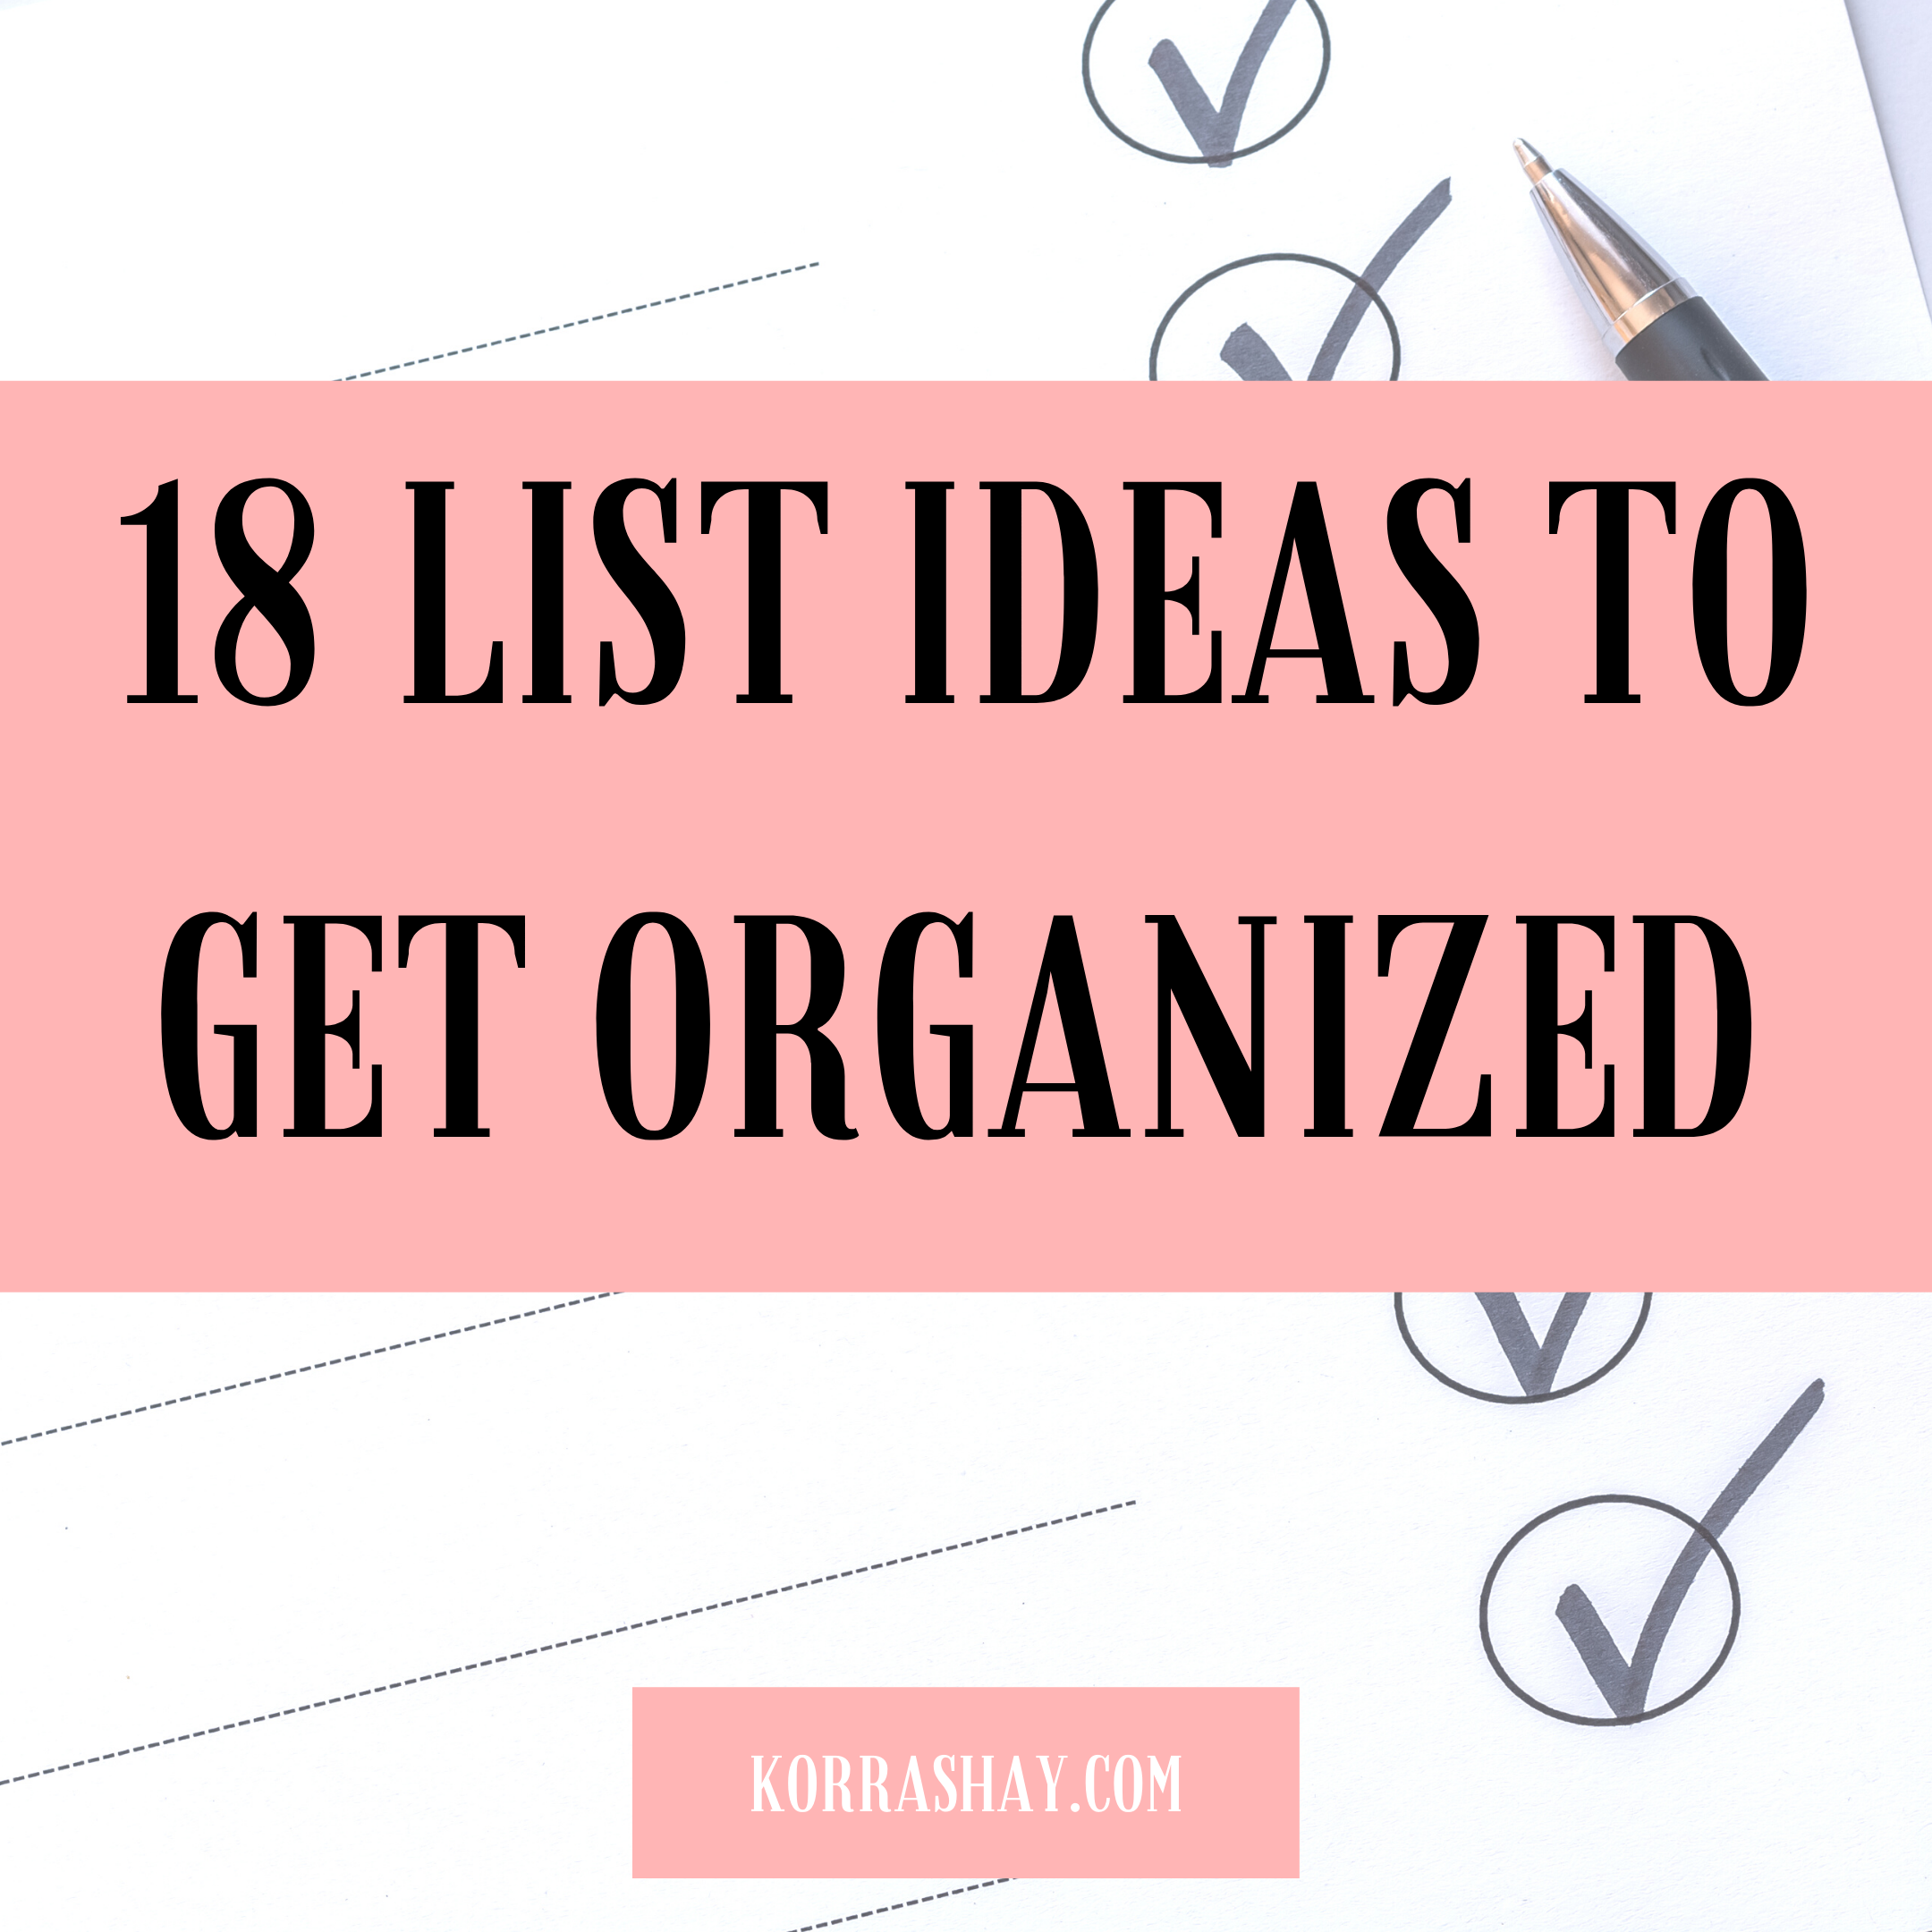 18 Lists To Get Organized: lists to make to stay organized!